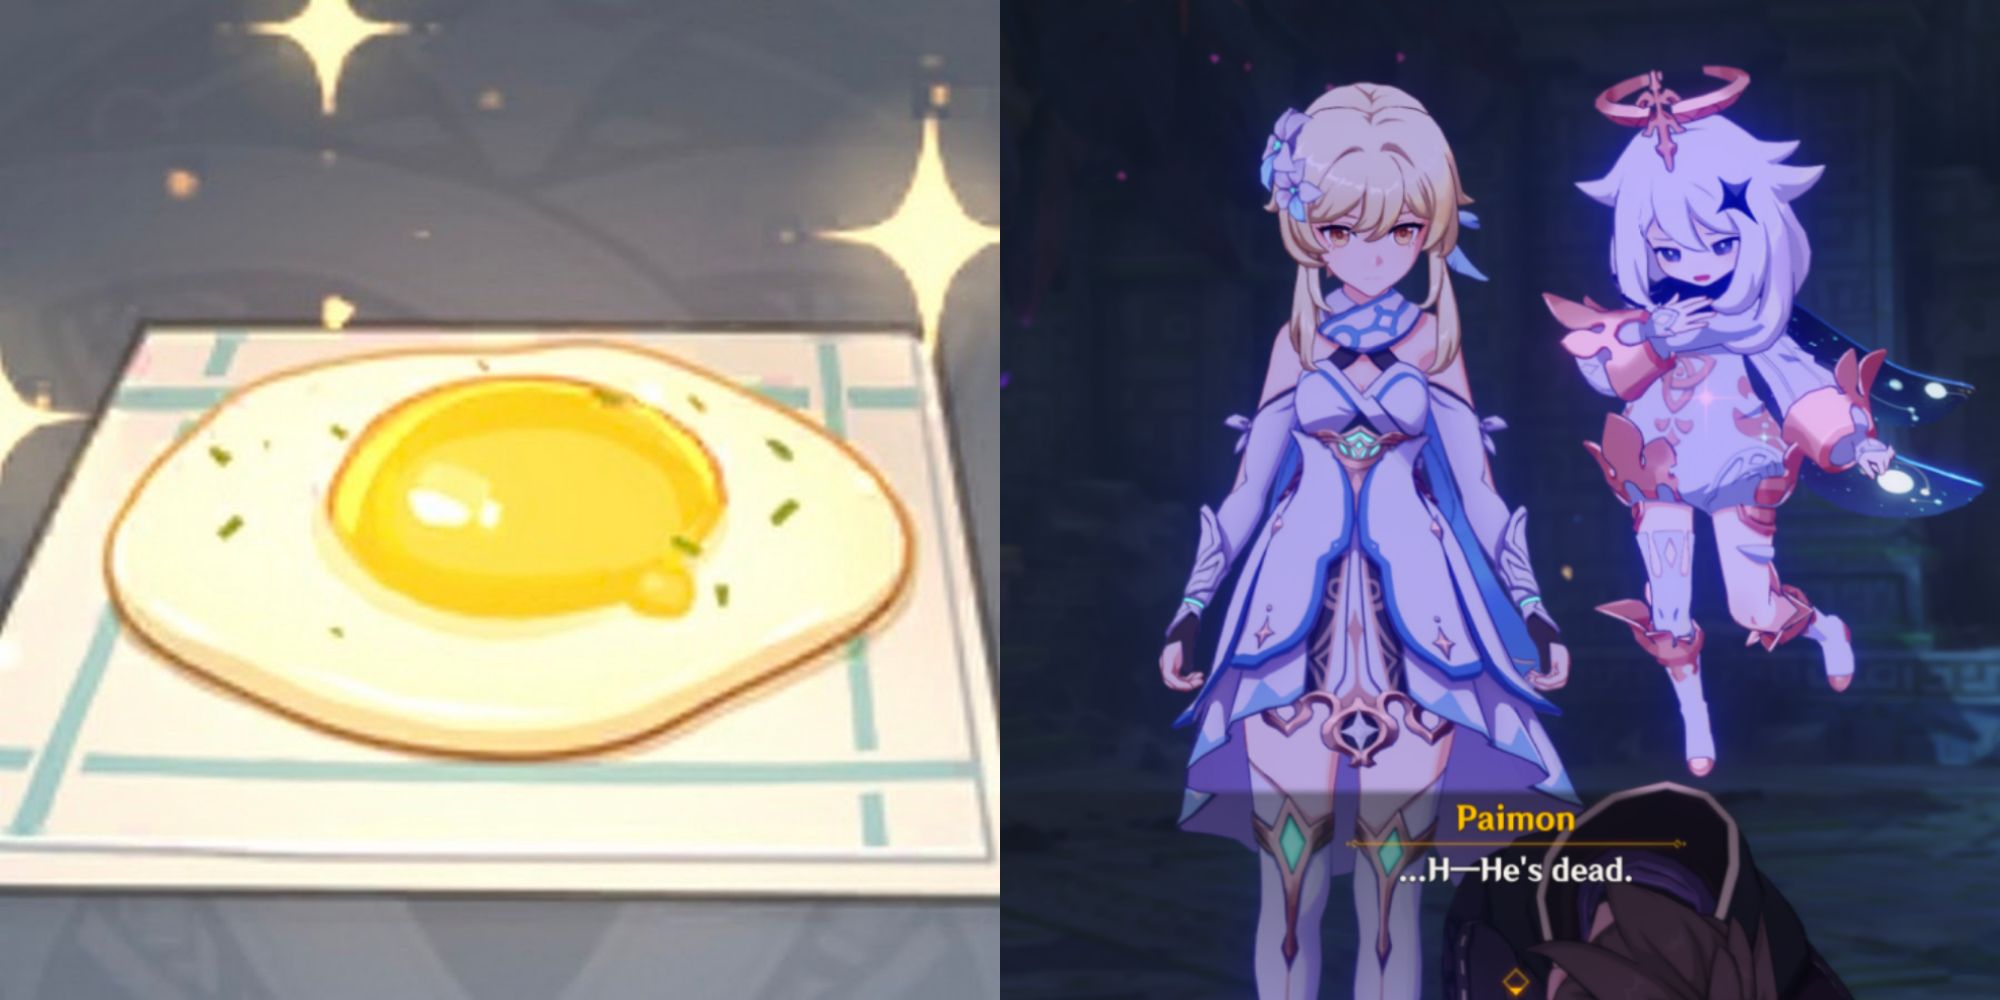 A Teyvat Fried Egg collaged next to a Genshin Impact screenshot featuring Paimon telling the Traveler that an unnamed character is dead